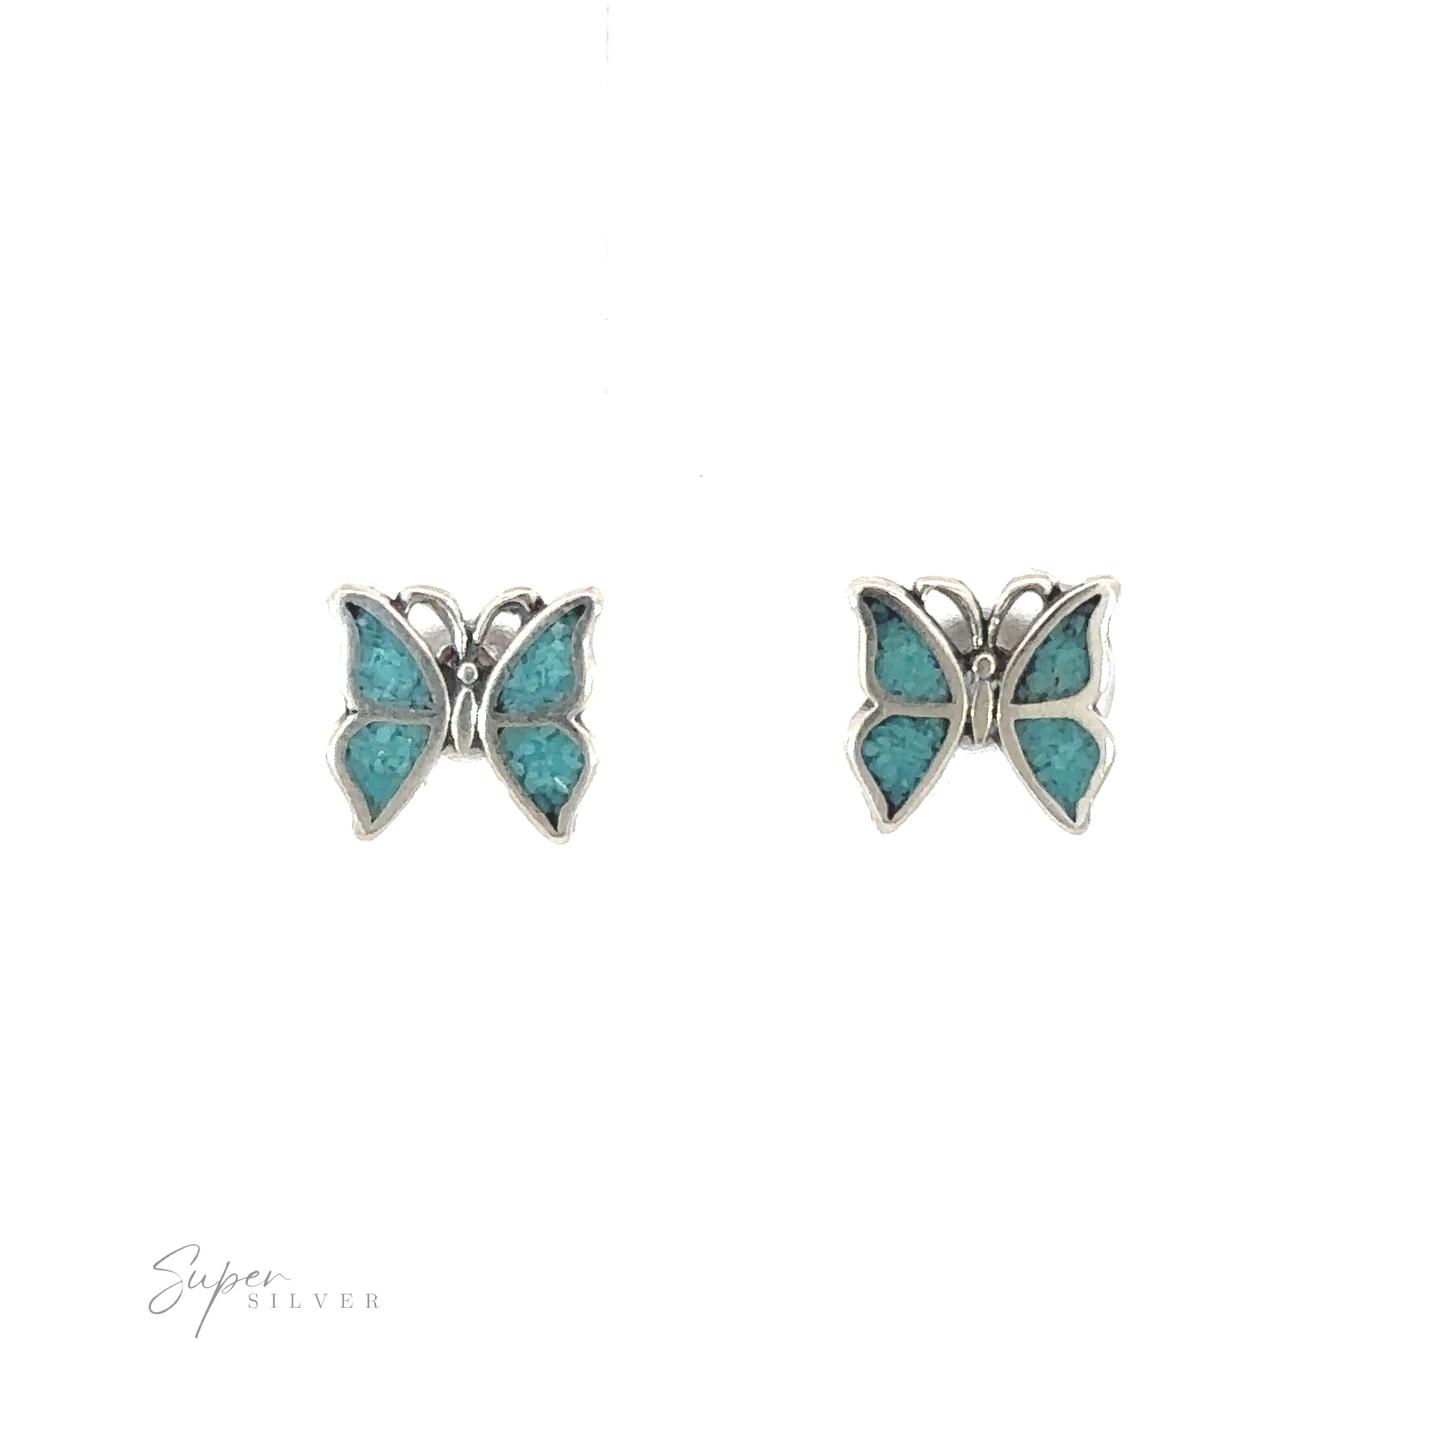 A pair of Turquoise Butterfly Studs on a white background.